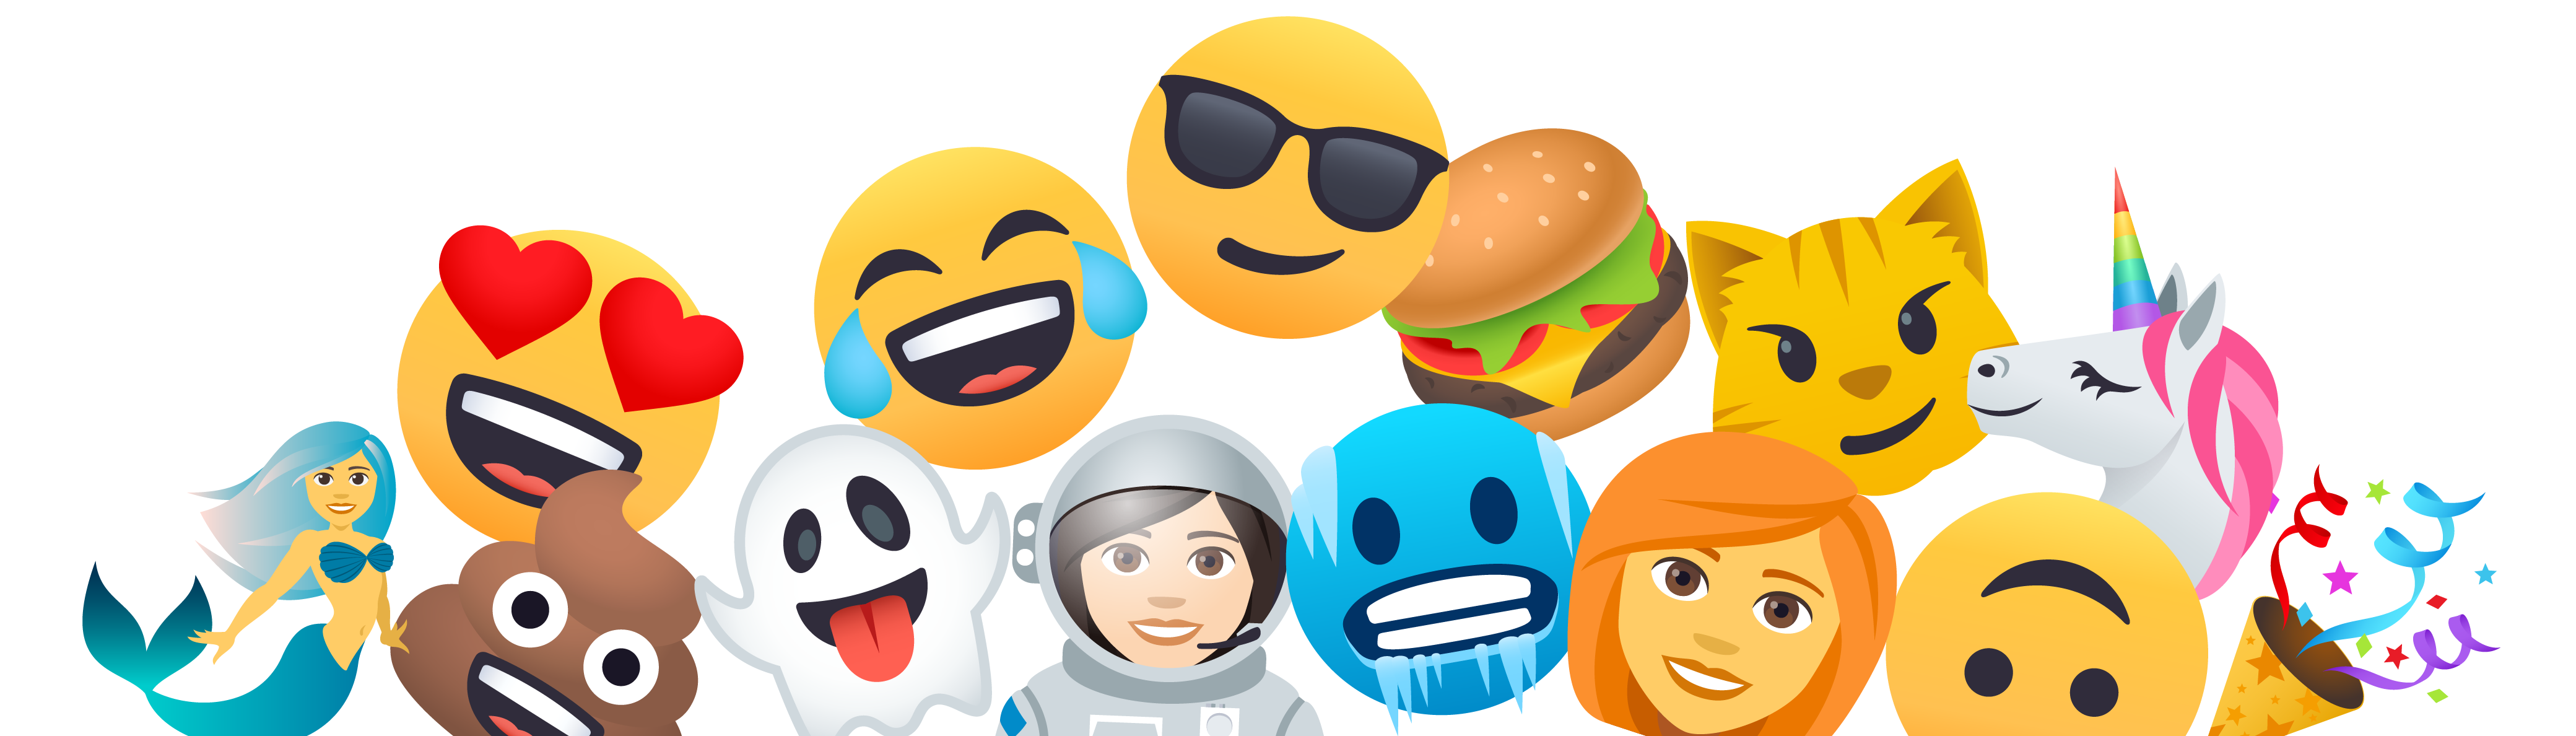 Born Licensing Teams with Joypixels to Offer over 2,800 Emojis to License in Advertising